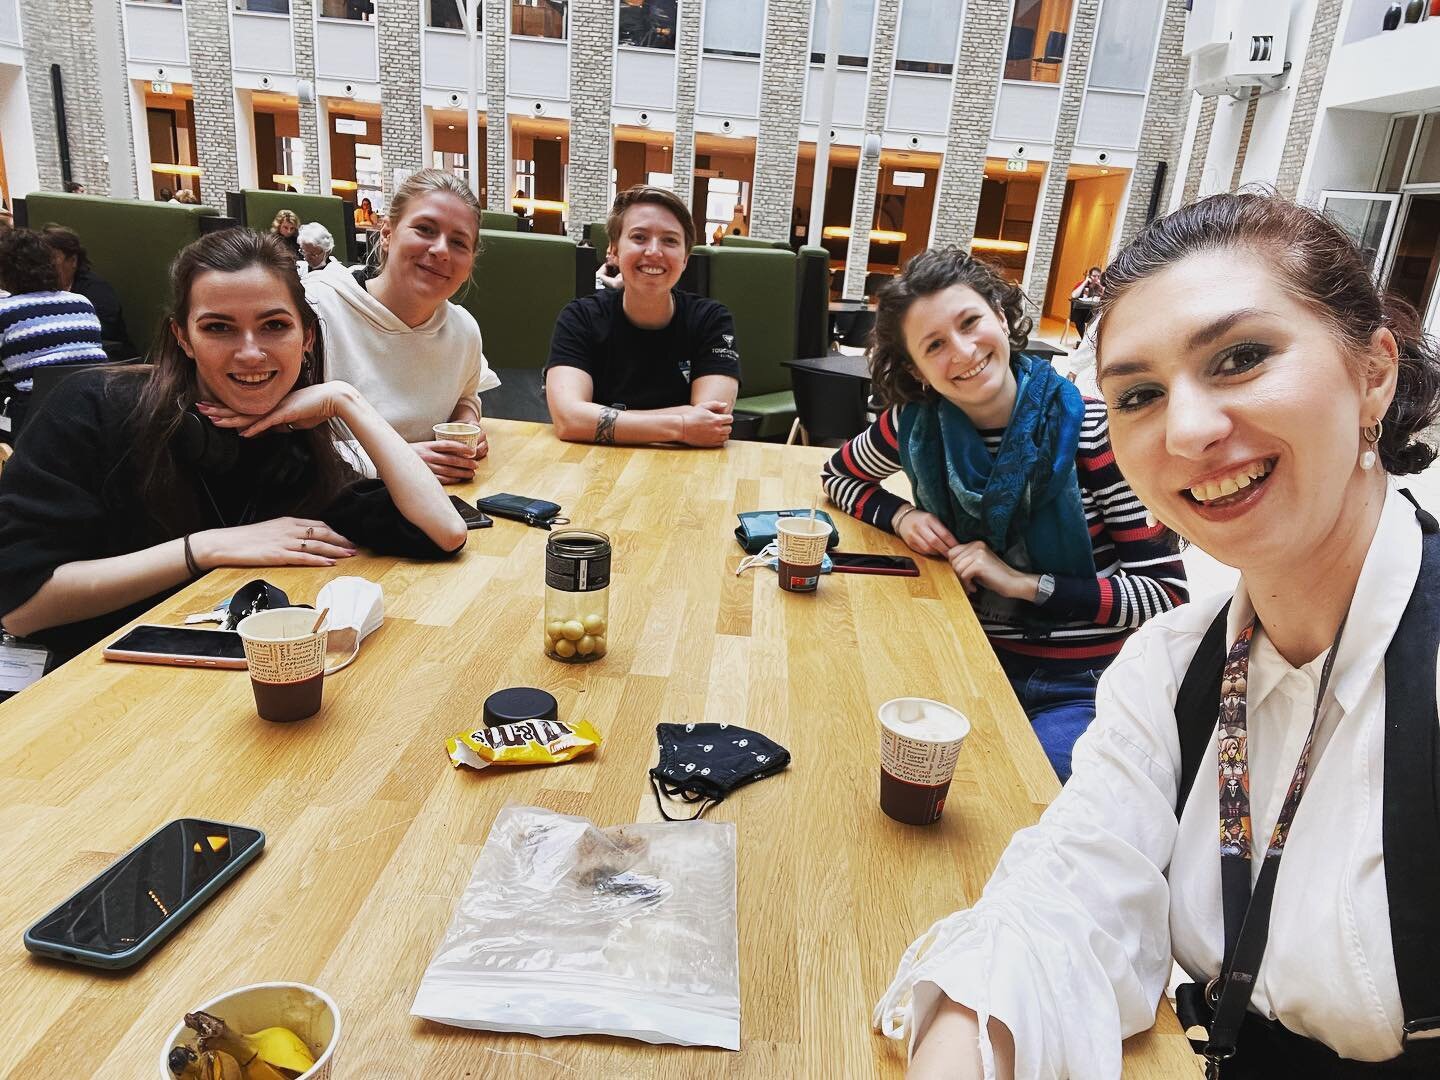 Oh but what is this? Wait another @scils_eu recruit joins the Ciliarium coffee break?! Welcome Giulia @ironsgram !! Lovely to have you over! @whitingpc @dykeywykey @andepande123